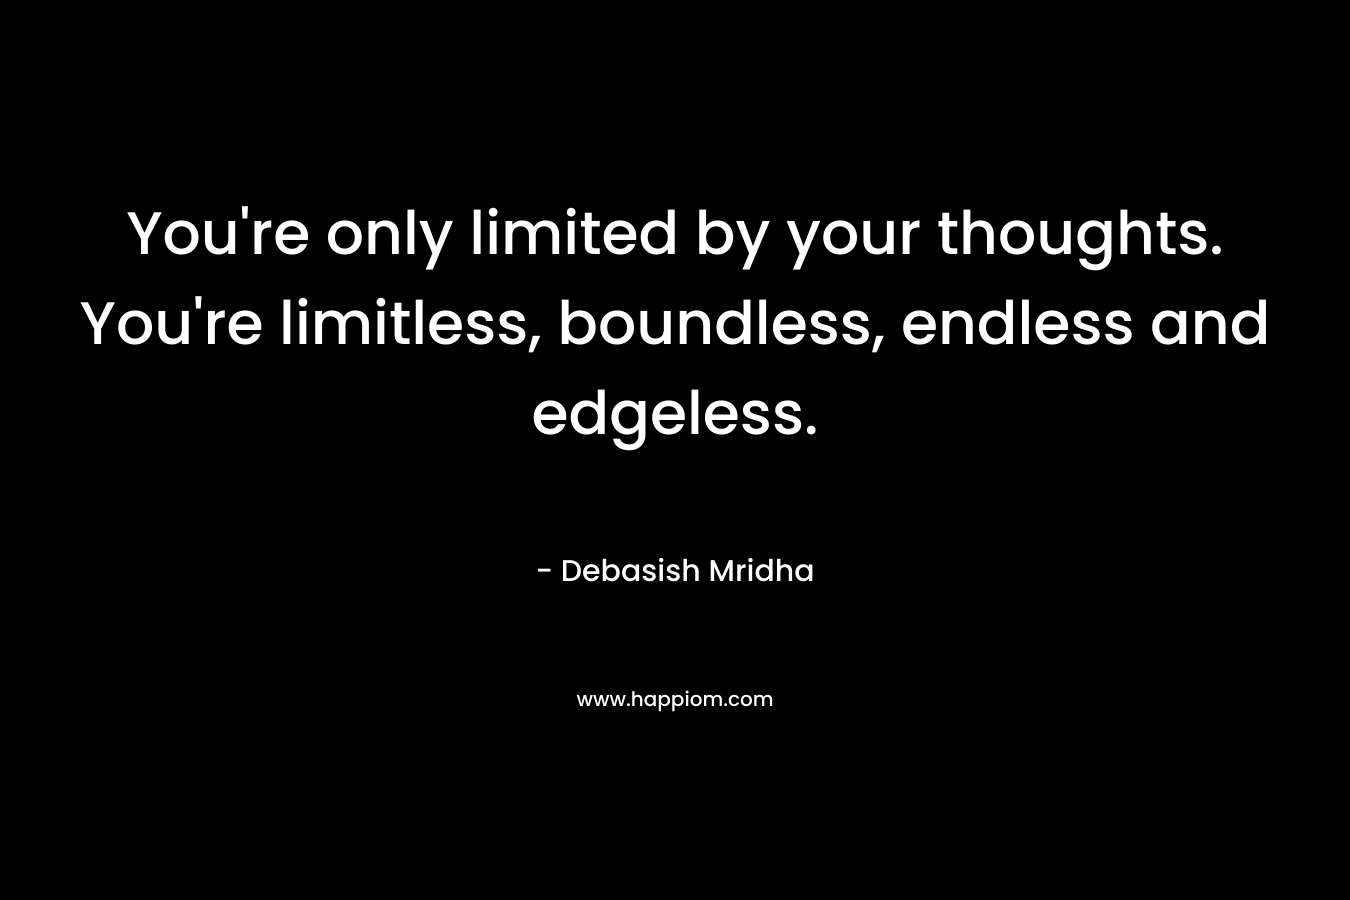 You're only limited by your thoughts. You're limitless, boundless, endless and edgeless.